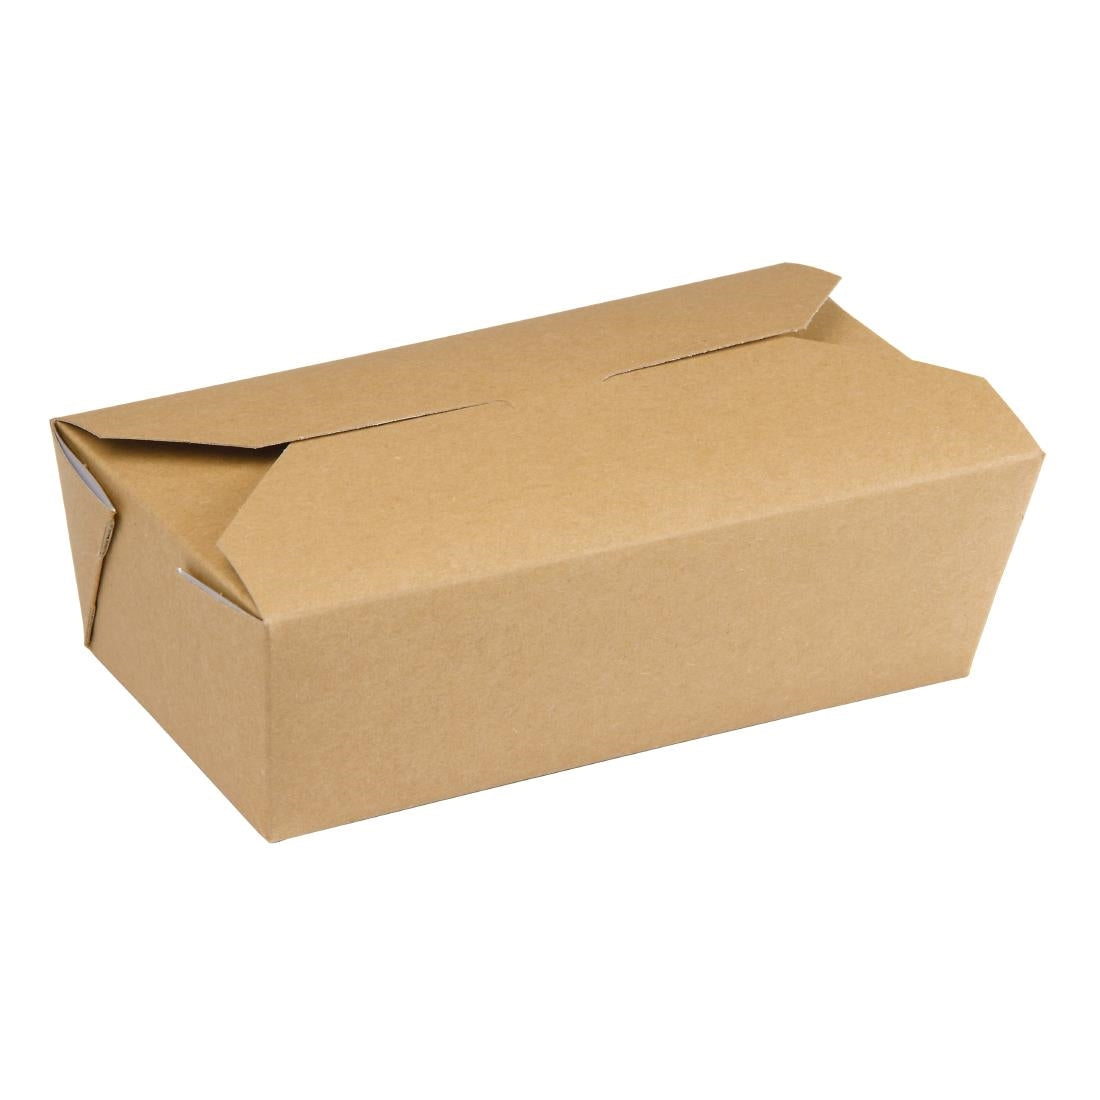 DM173 Colpac Recyclable Microwavable Food Boxes Rectangular 985ml / 34oz (Pack of 250) JD Catering Equipment Solutions Ltd